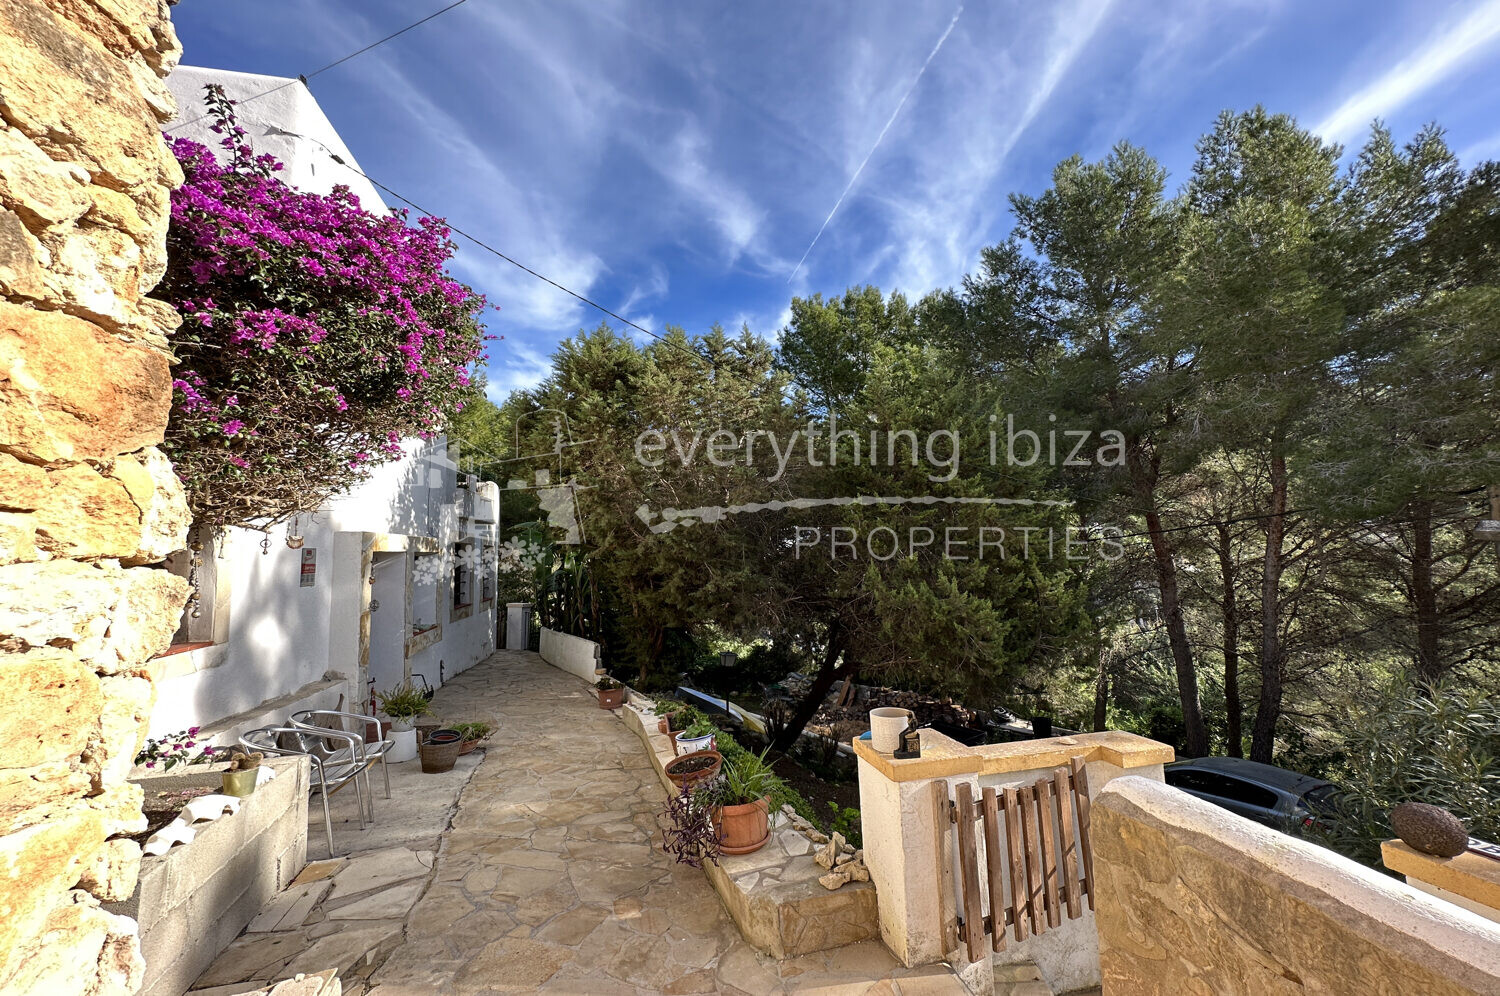 Charming Traditional Villa with Lots of Character in Cala Llonga, ref. 1520, for sale in Ibiza by everything ibiza Properties